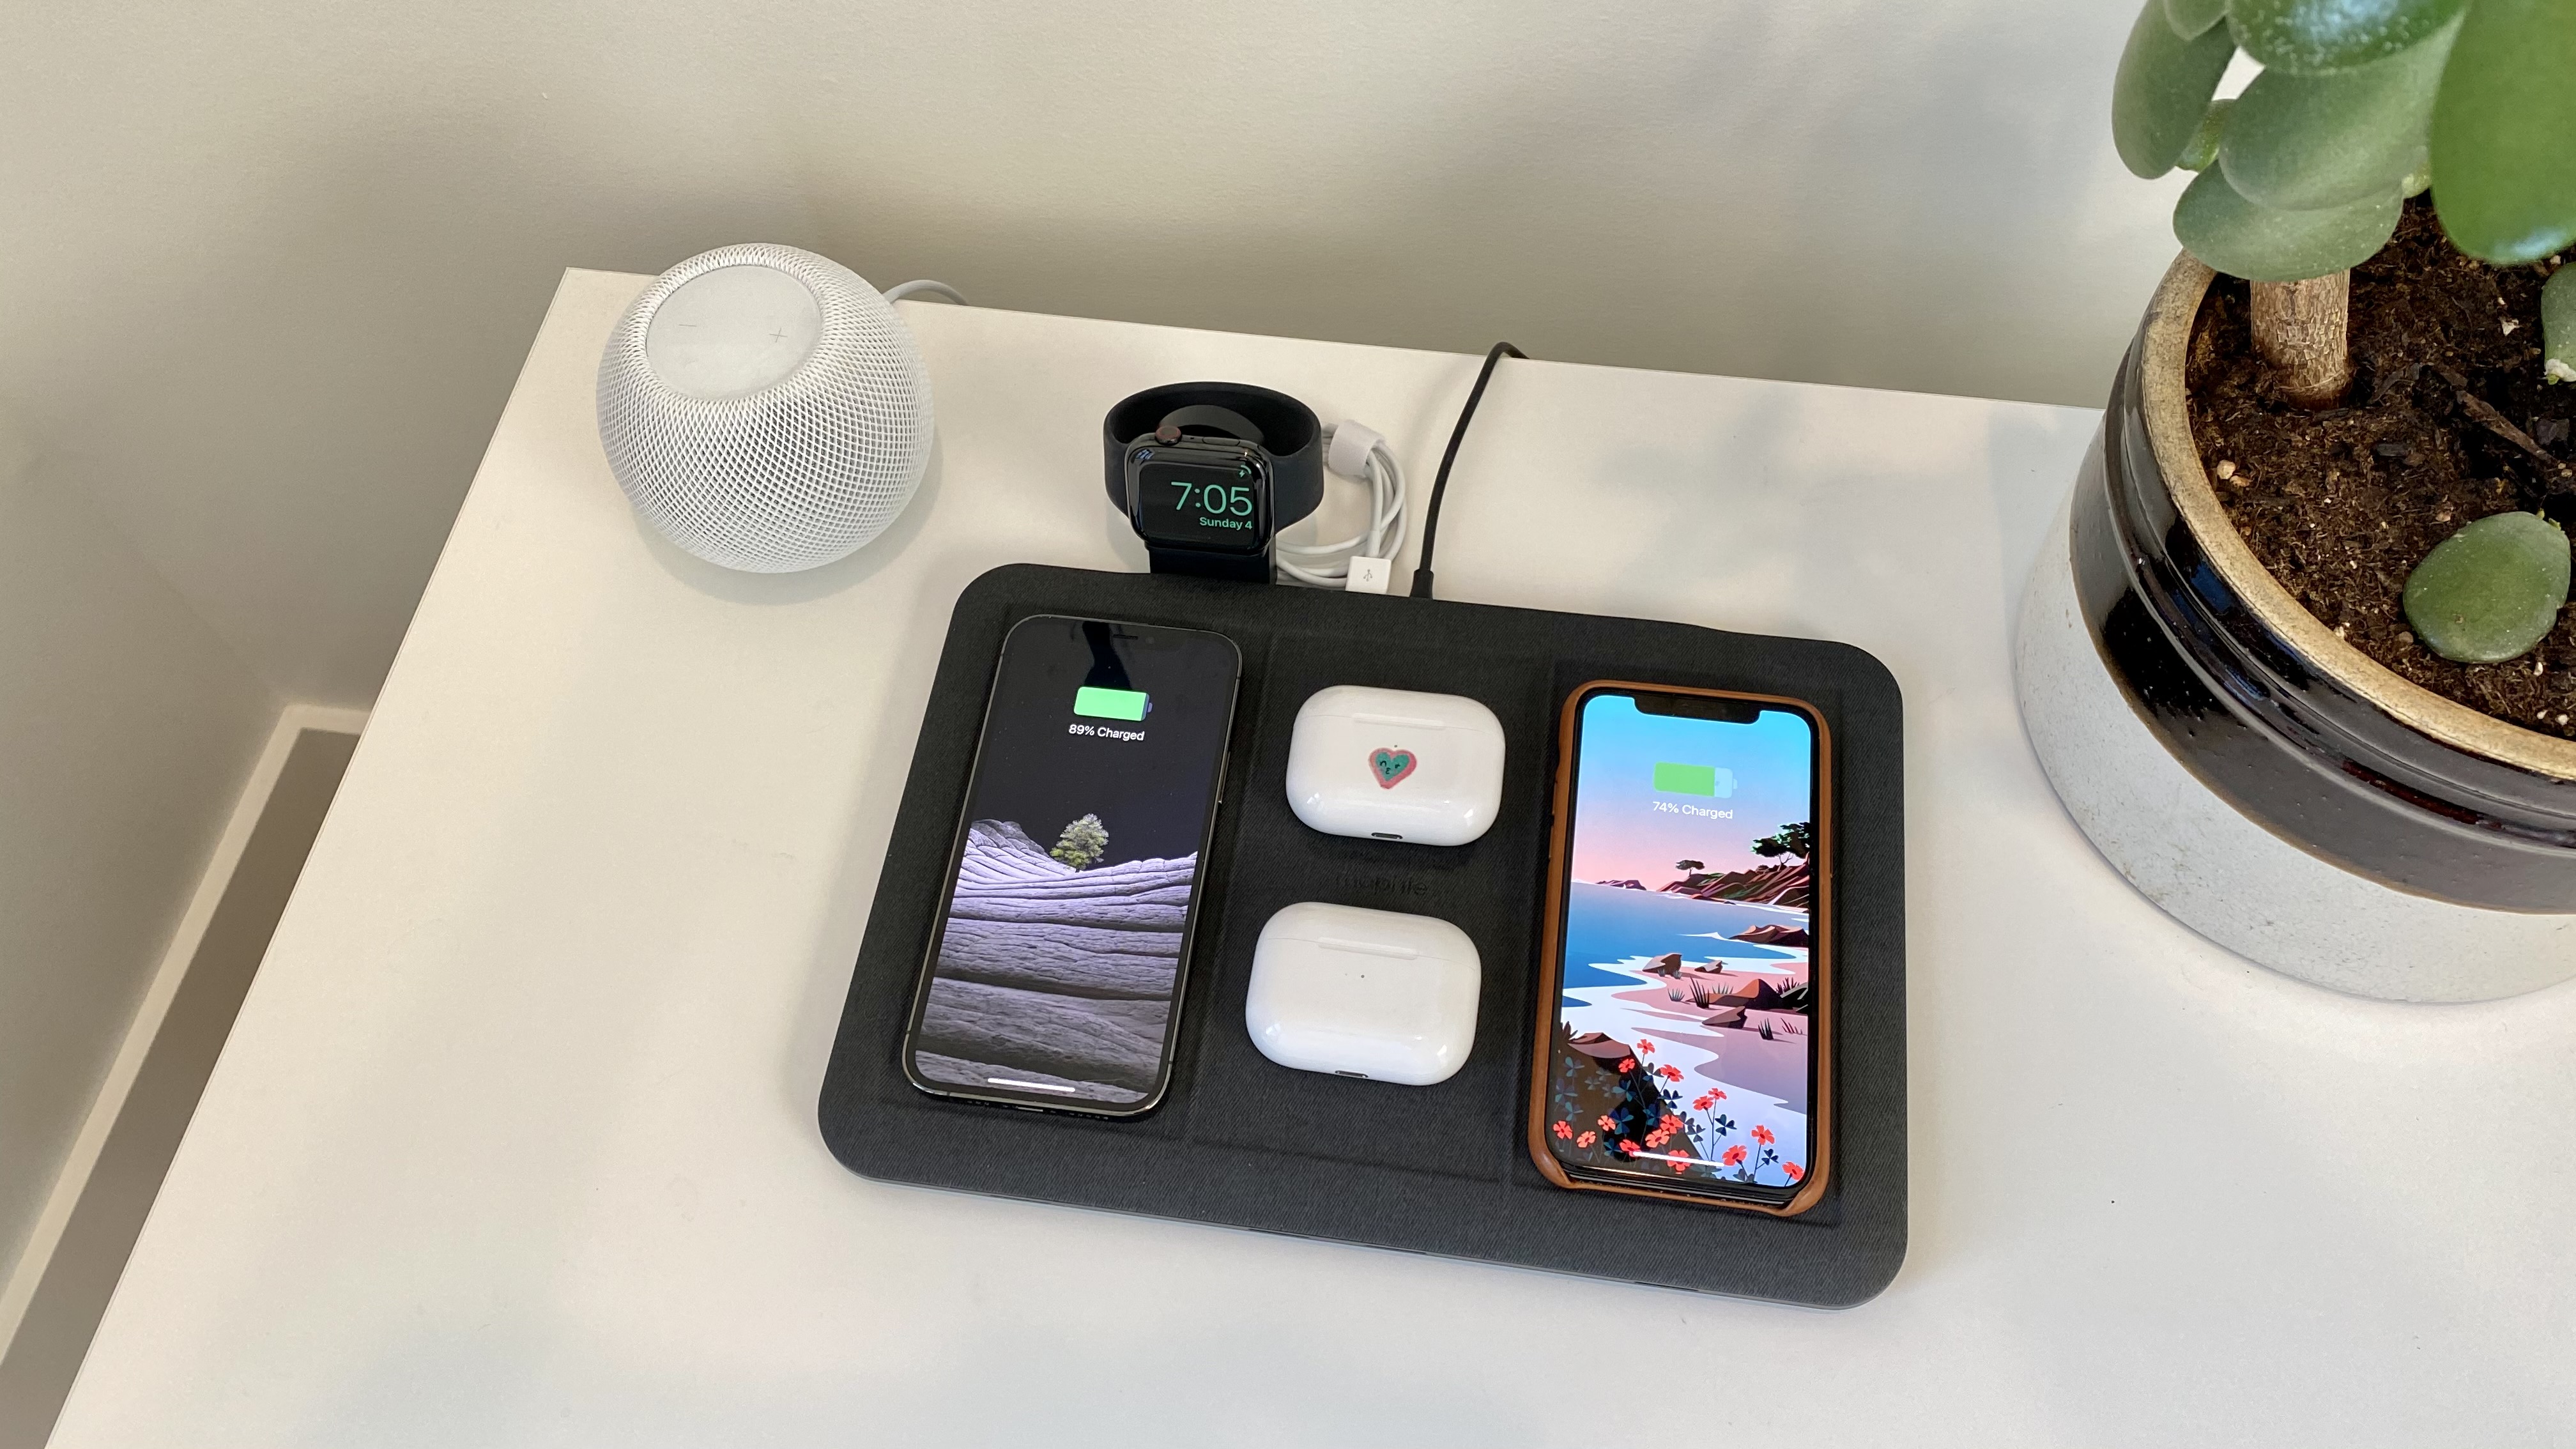 telex Installatie Klas Mophie 4-in-1 wireless charging for iPhone/AirPods - Review - 9to5Mac